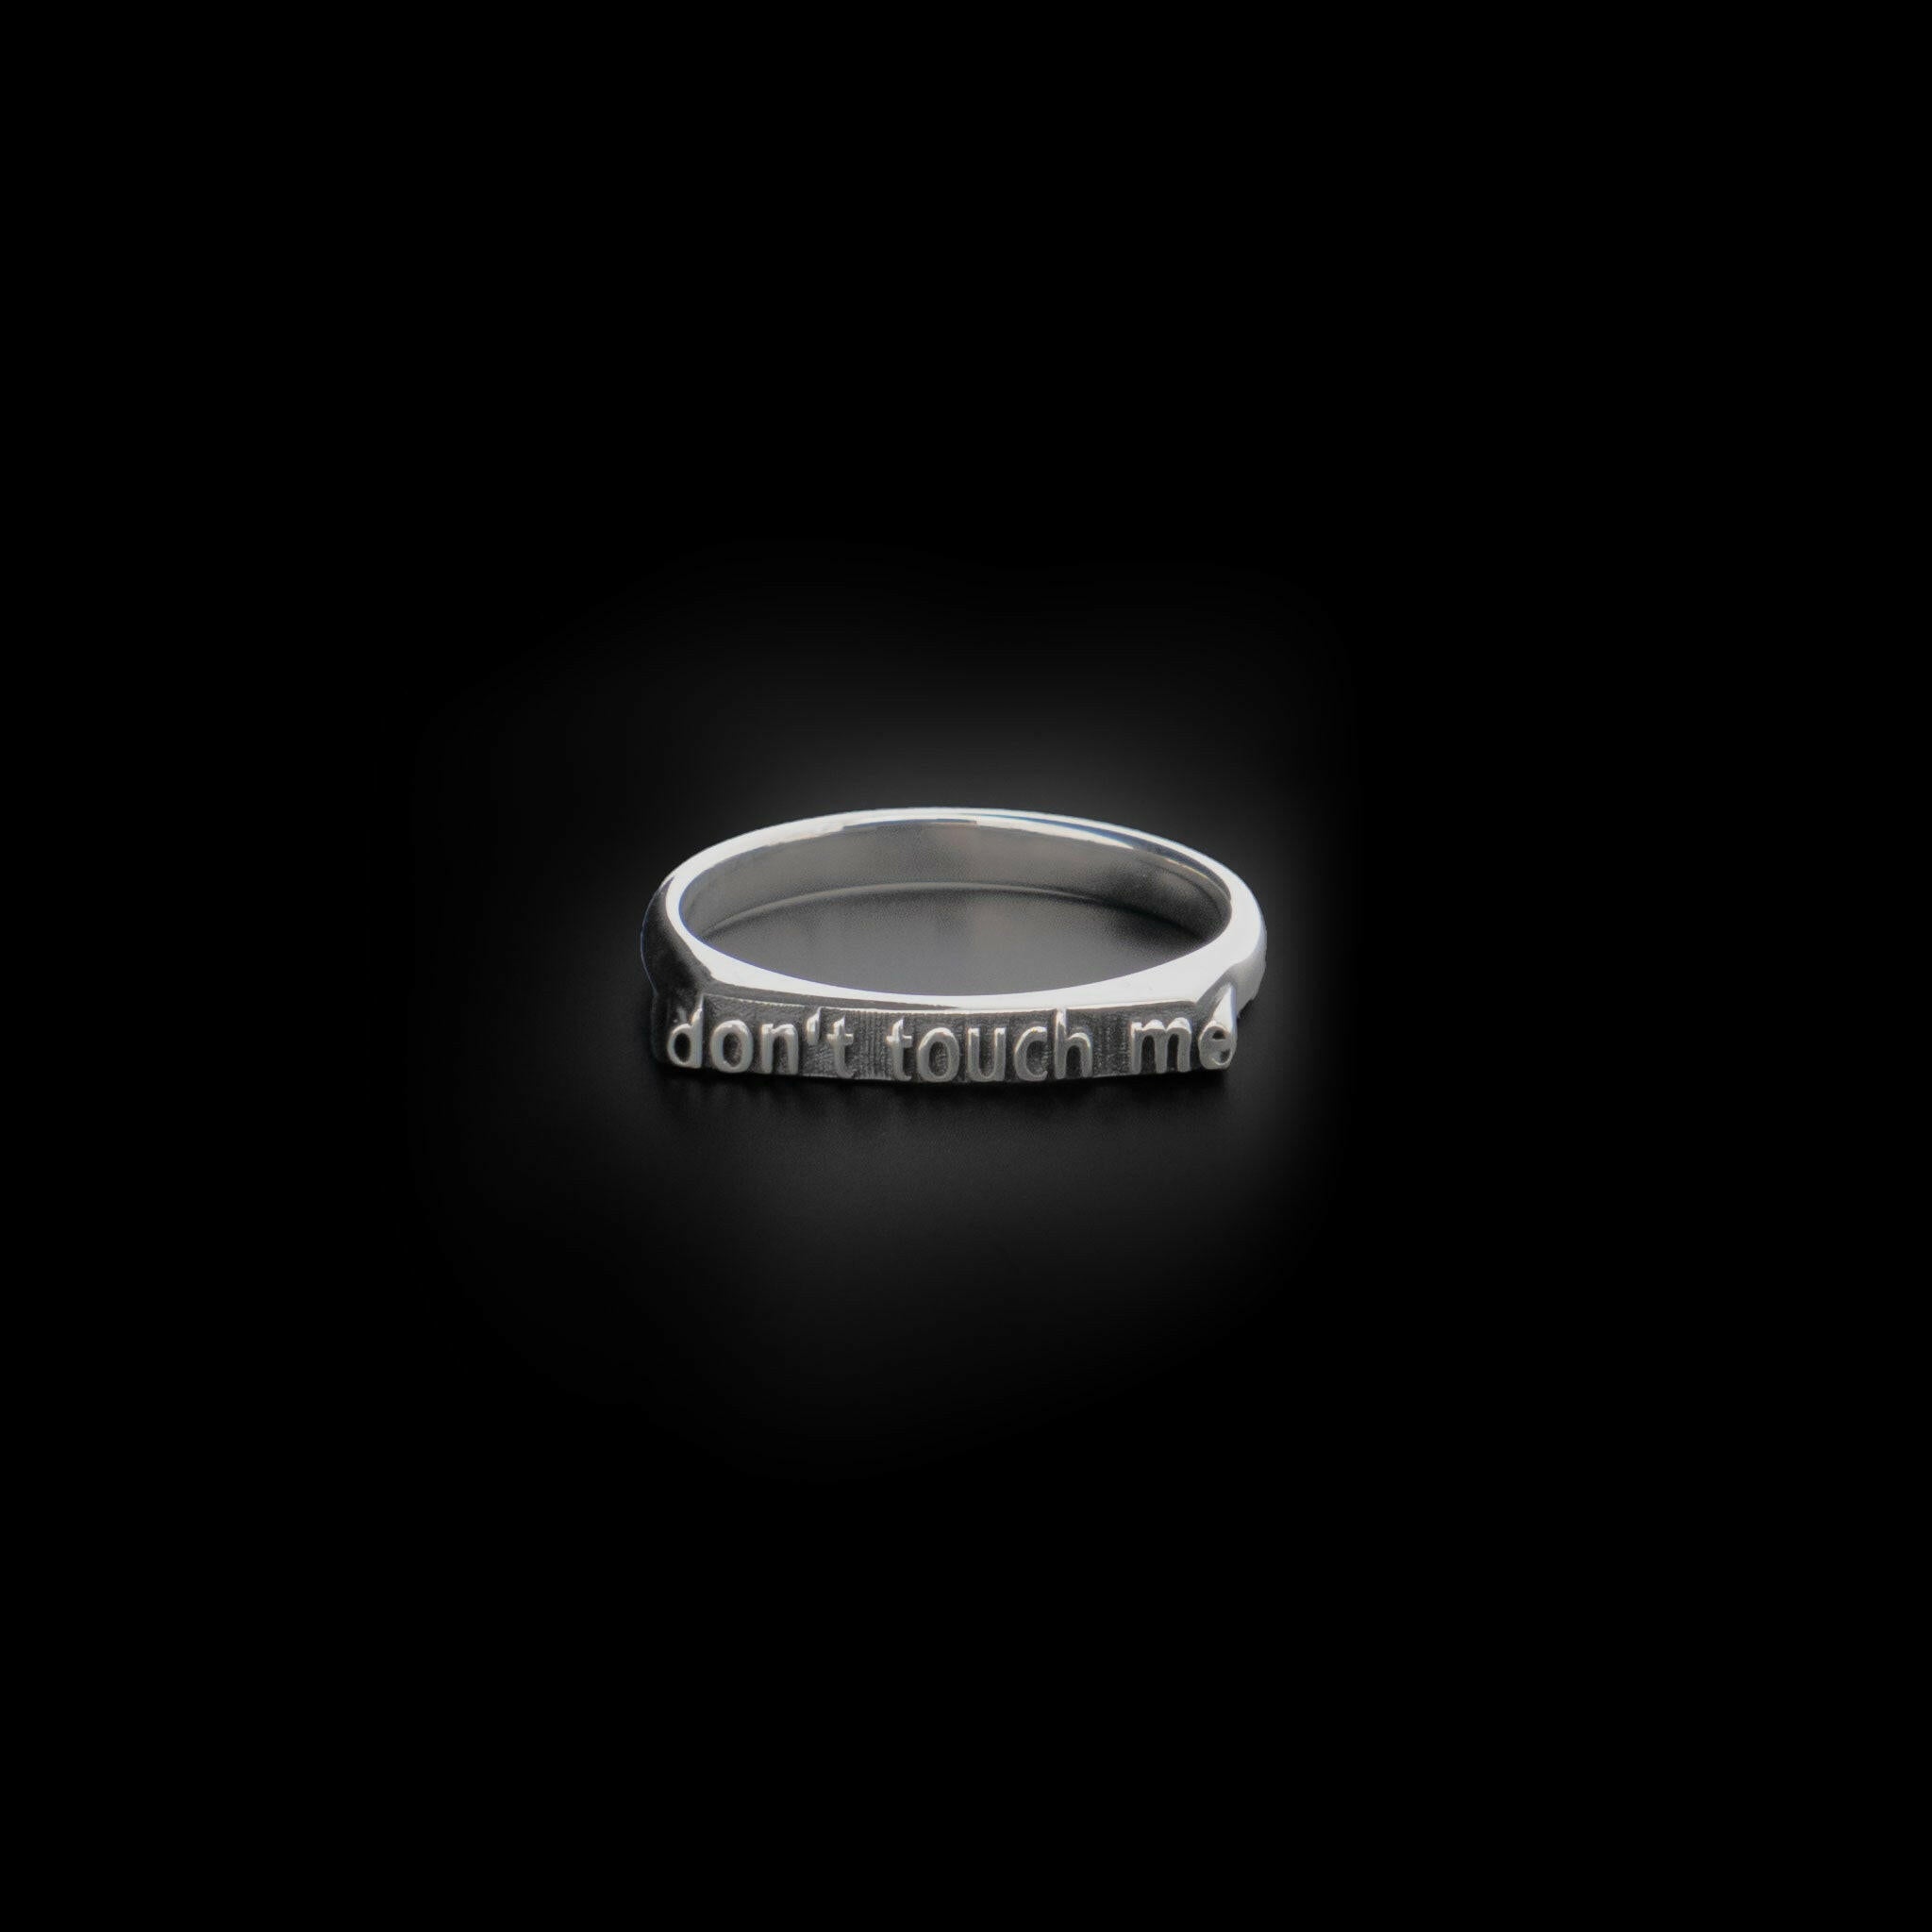 front view of sterling silver ring with text that reads "don't touch me"